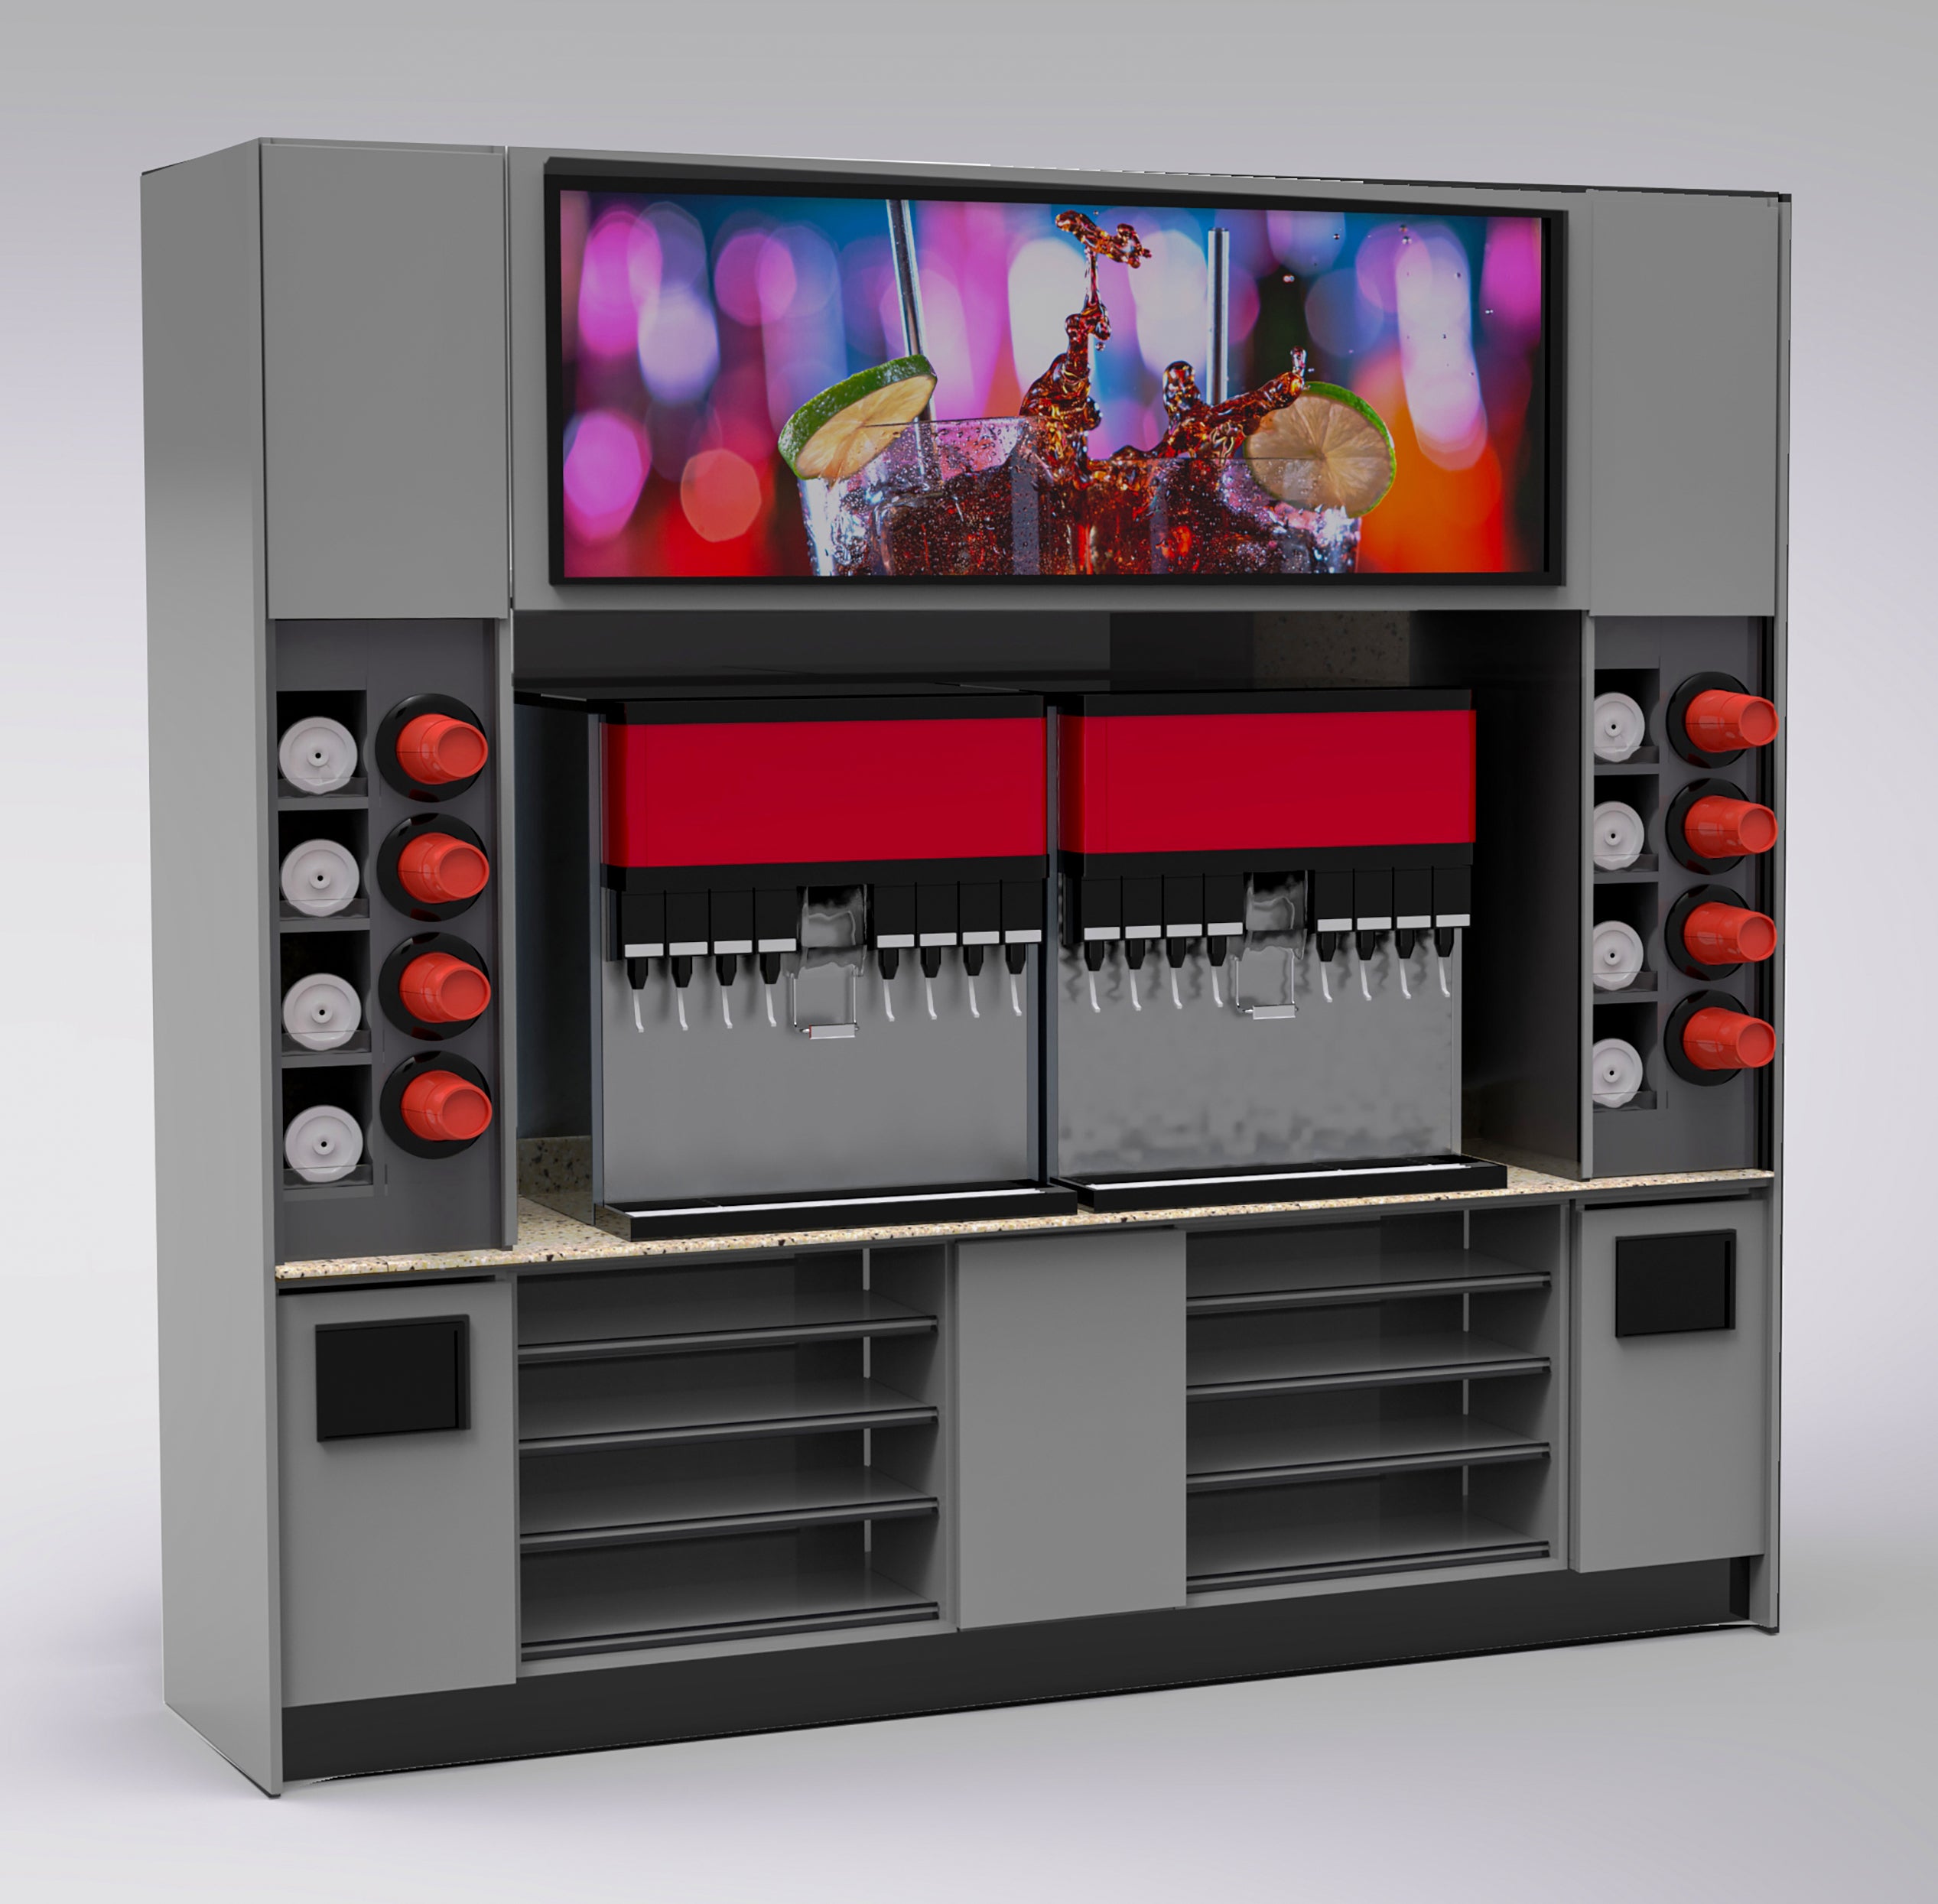 Modular Self-Serve Beverage Station with Side Cup Dispensers: 115.5